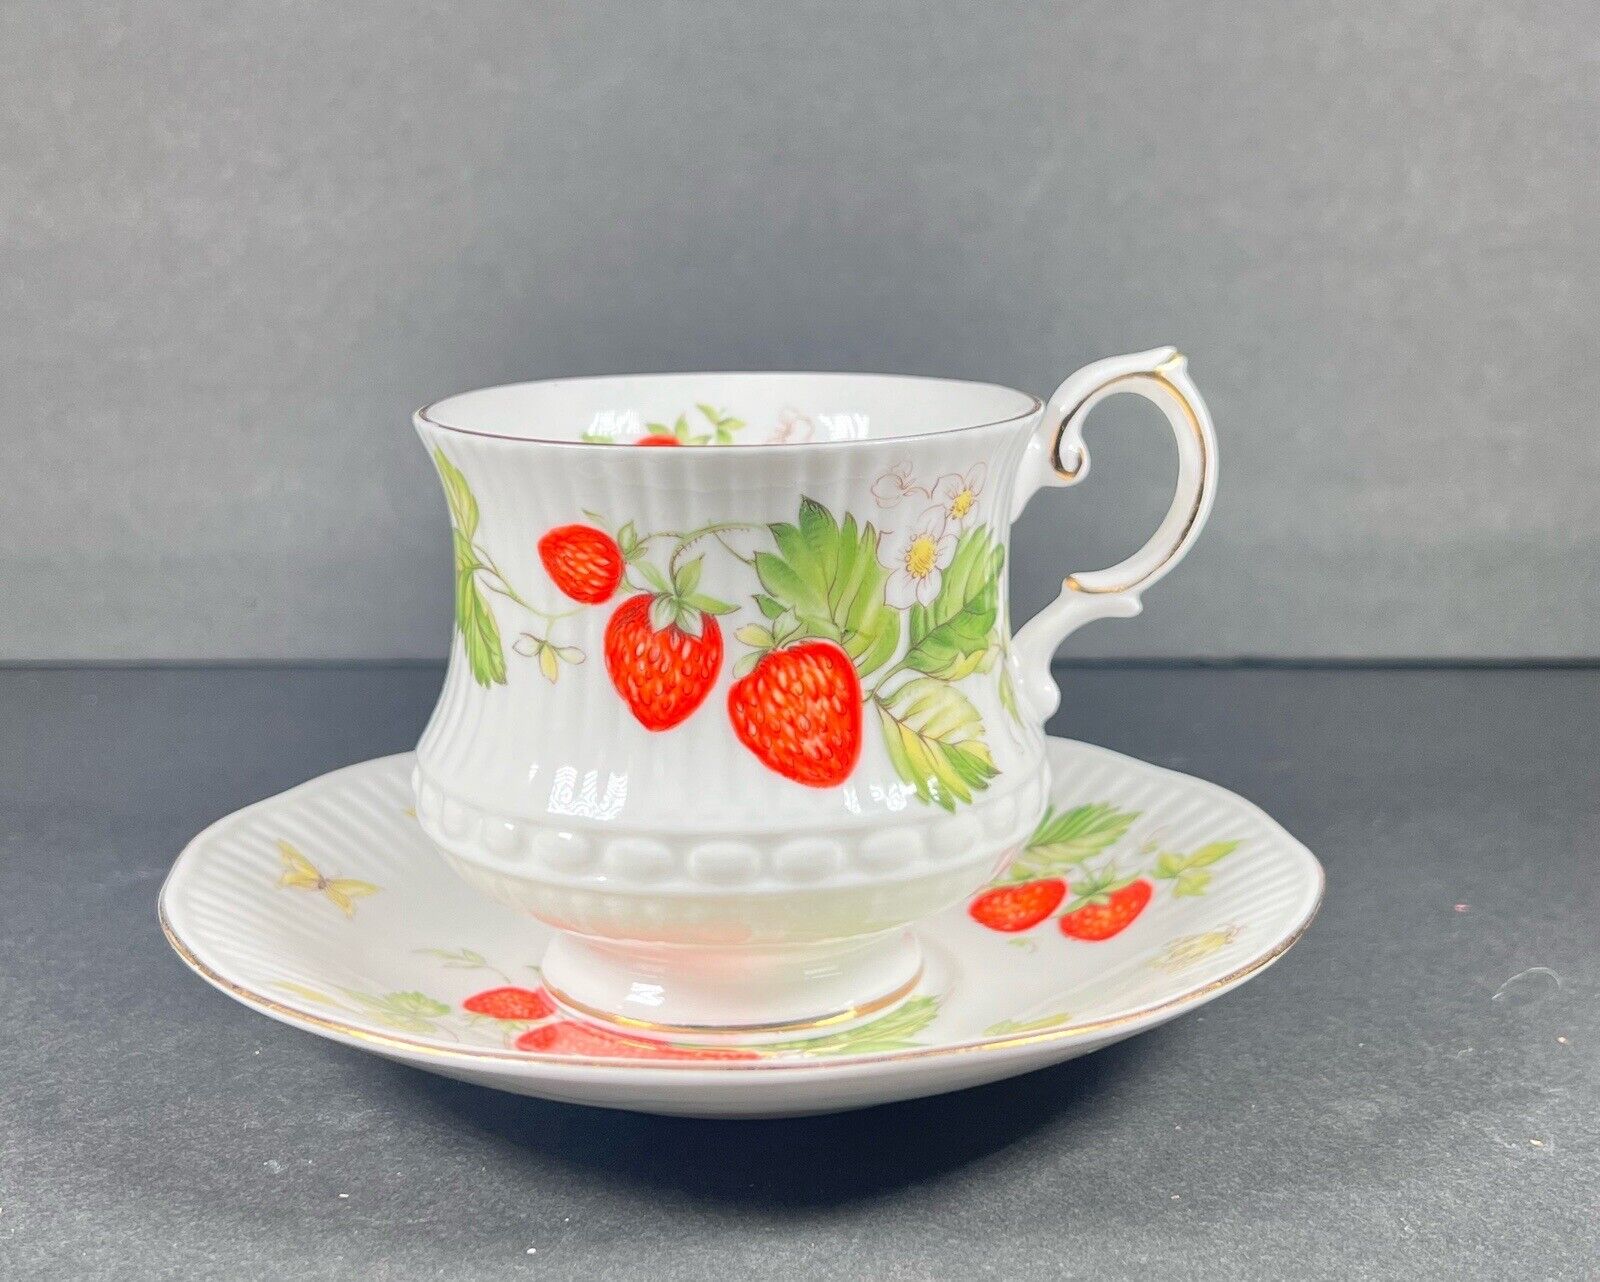 Rosina VIRGINIA STRAWBERRY TEACUP Red White Queens Vintage Bone China England